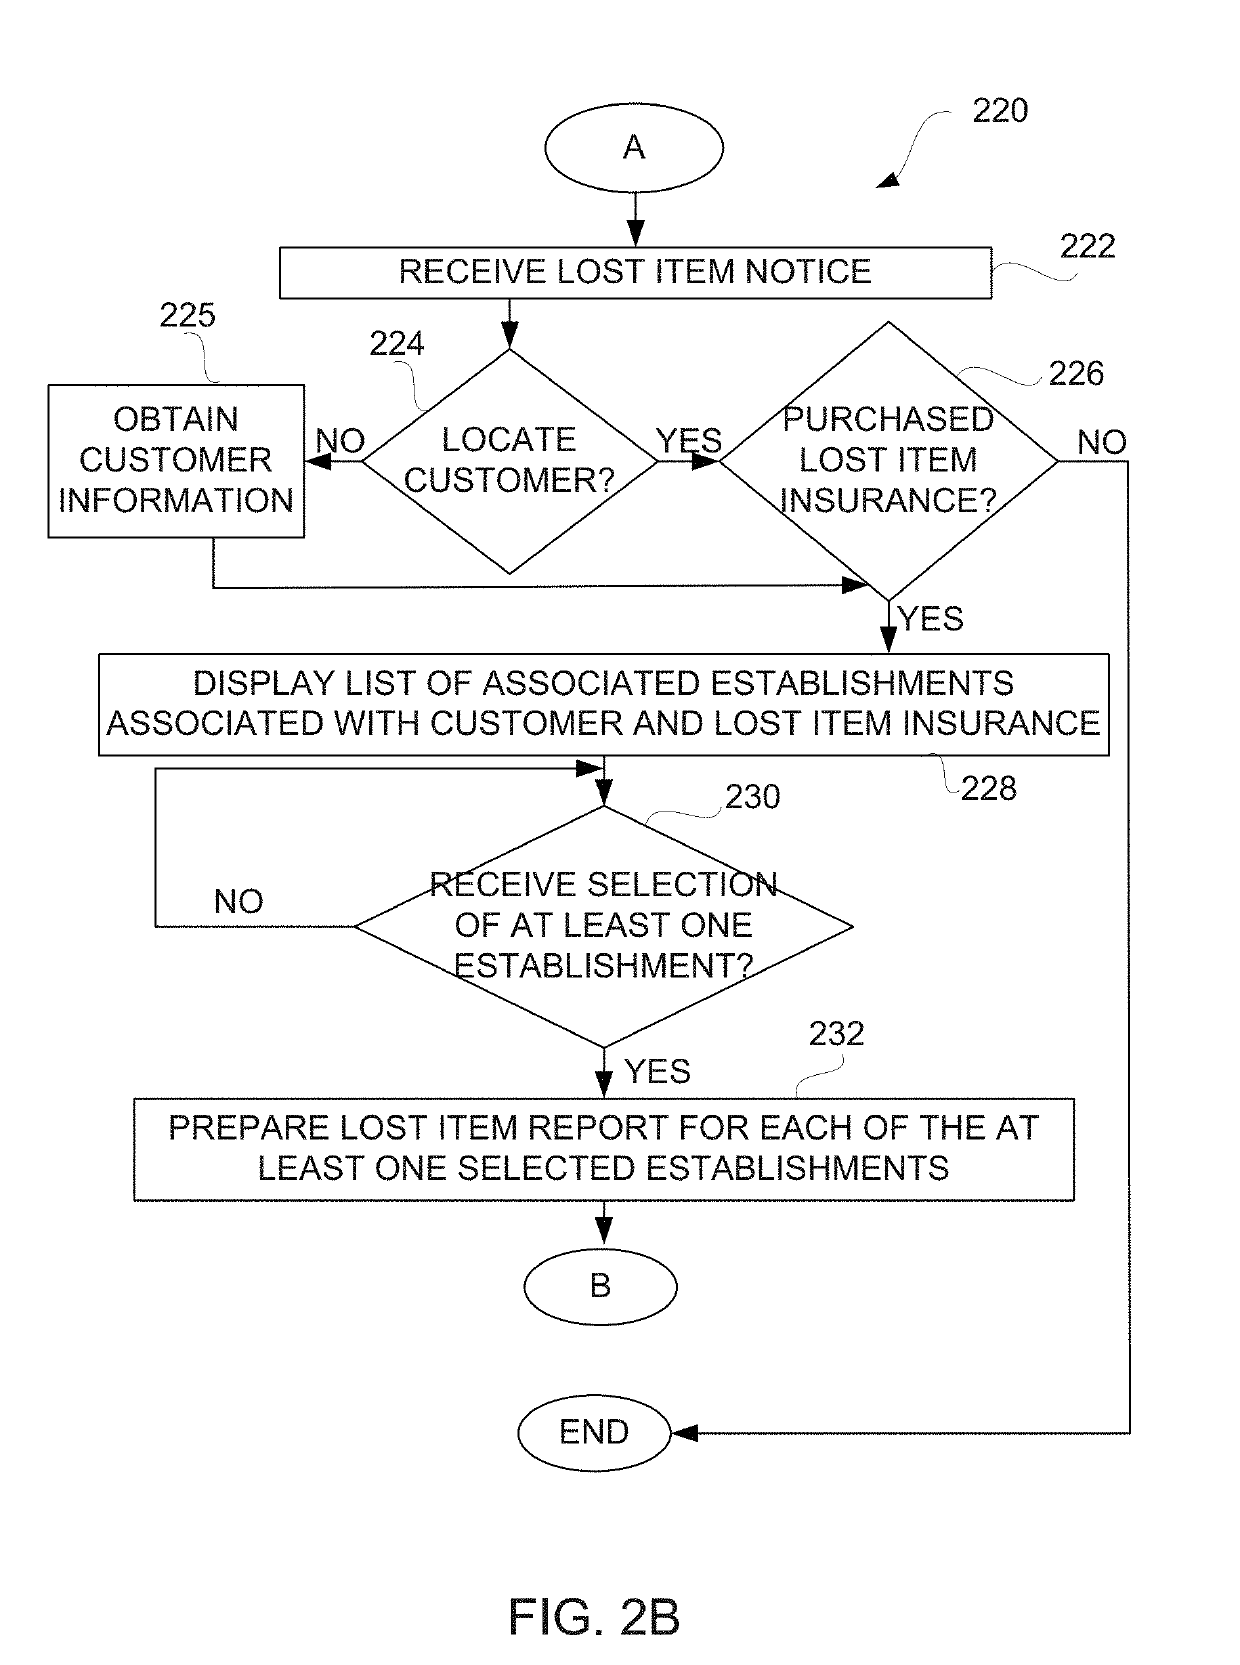 System and method for efficient and automatic reporting and return of lost items